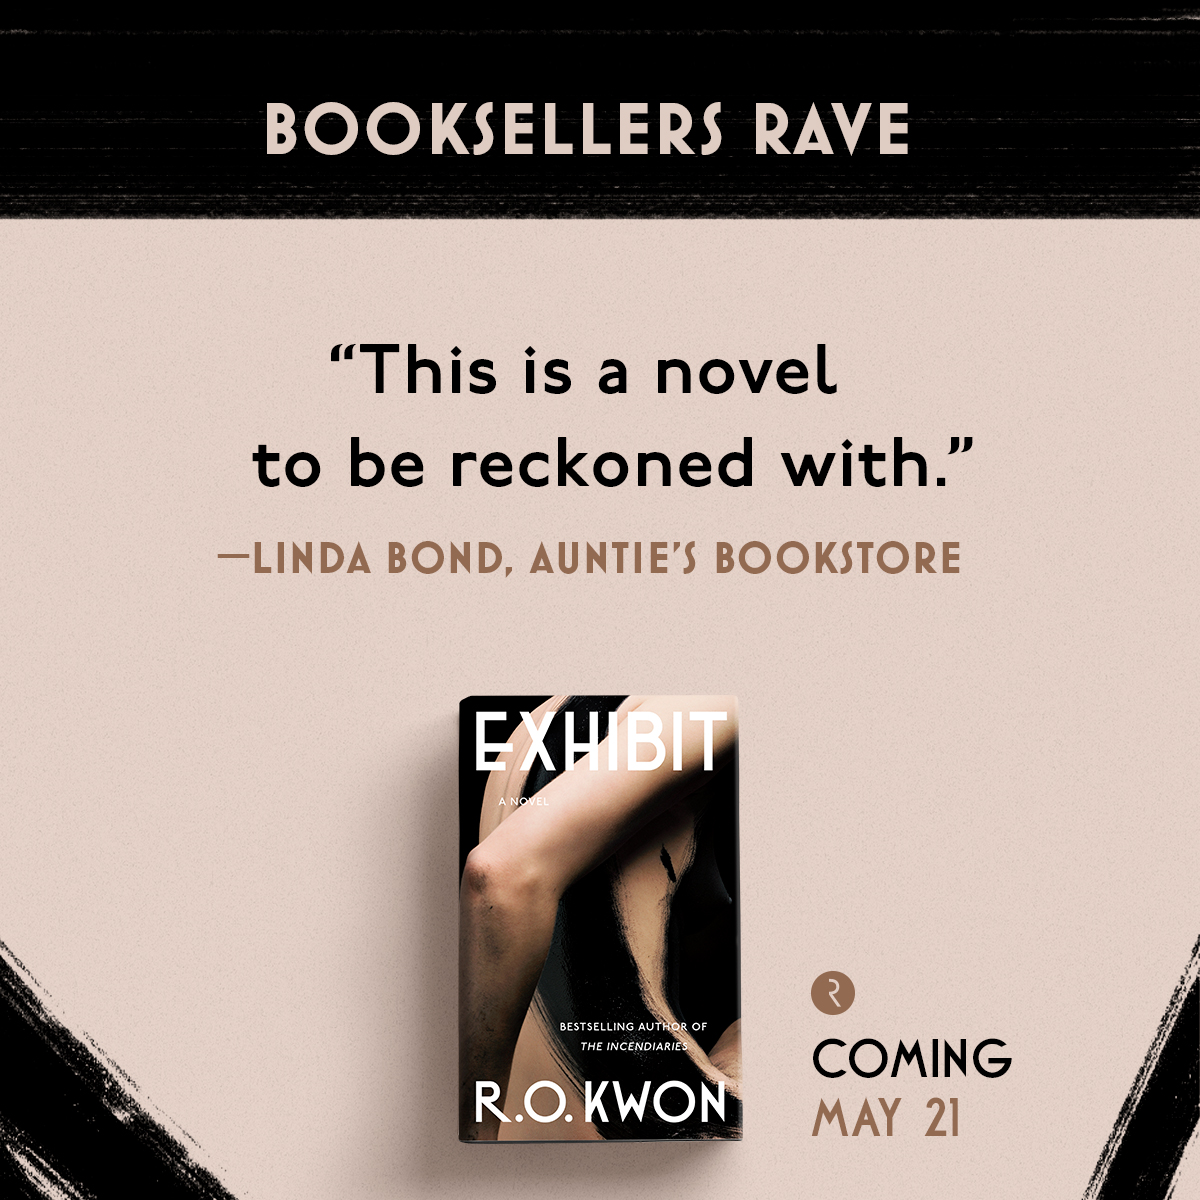 Booksellers like Linda at @auntiesbooks are RAVING about @rokwon's latest novel 😍 Read more about EXHIBIT, coming 5/21, here: bit.ly/3ZFXXom